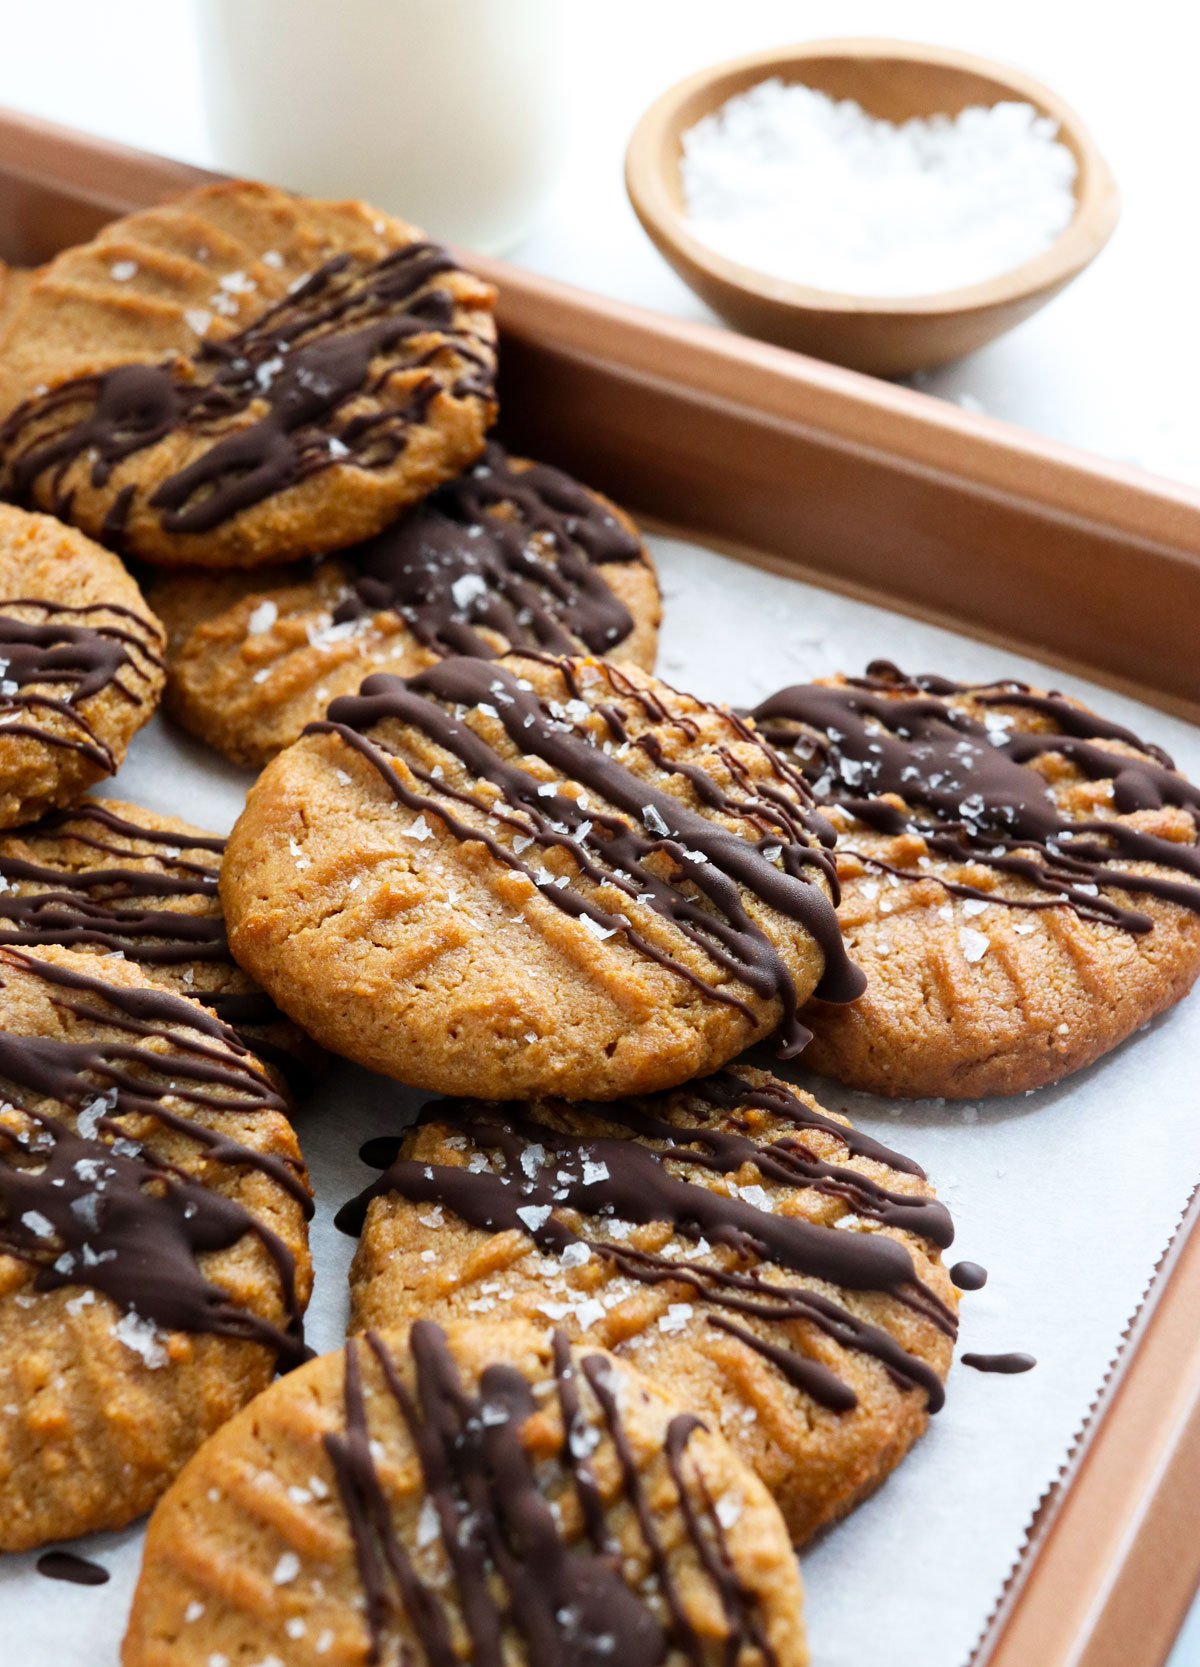 peanut butter cookies drizzled with dark chocolate on baking sheet